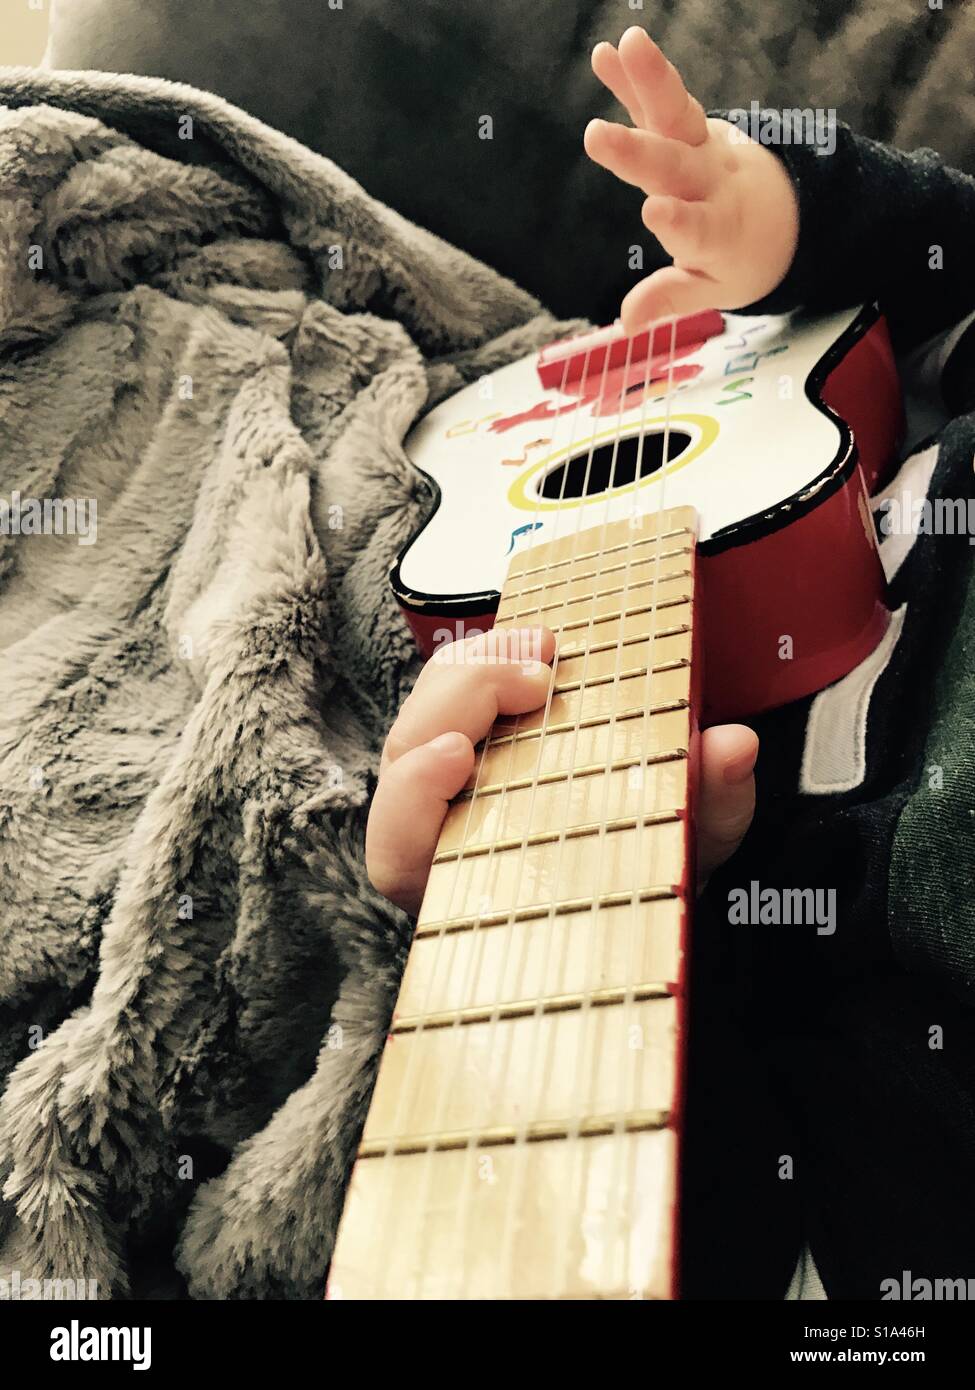 Never too young to learn guitar. Stock Photo